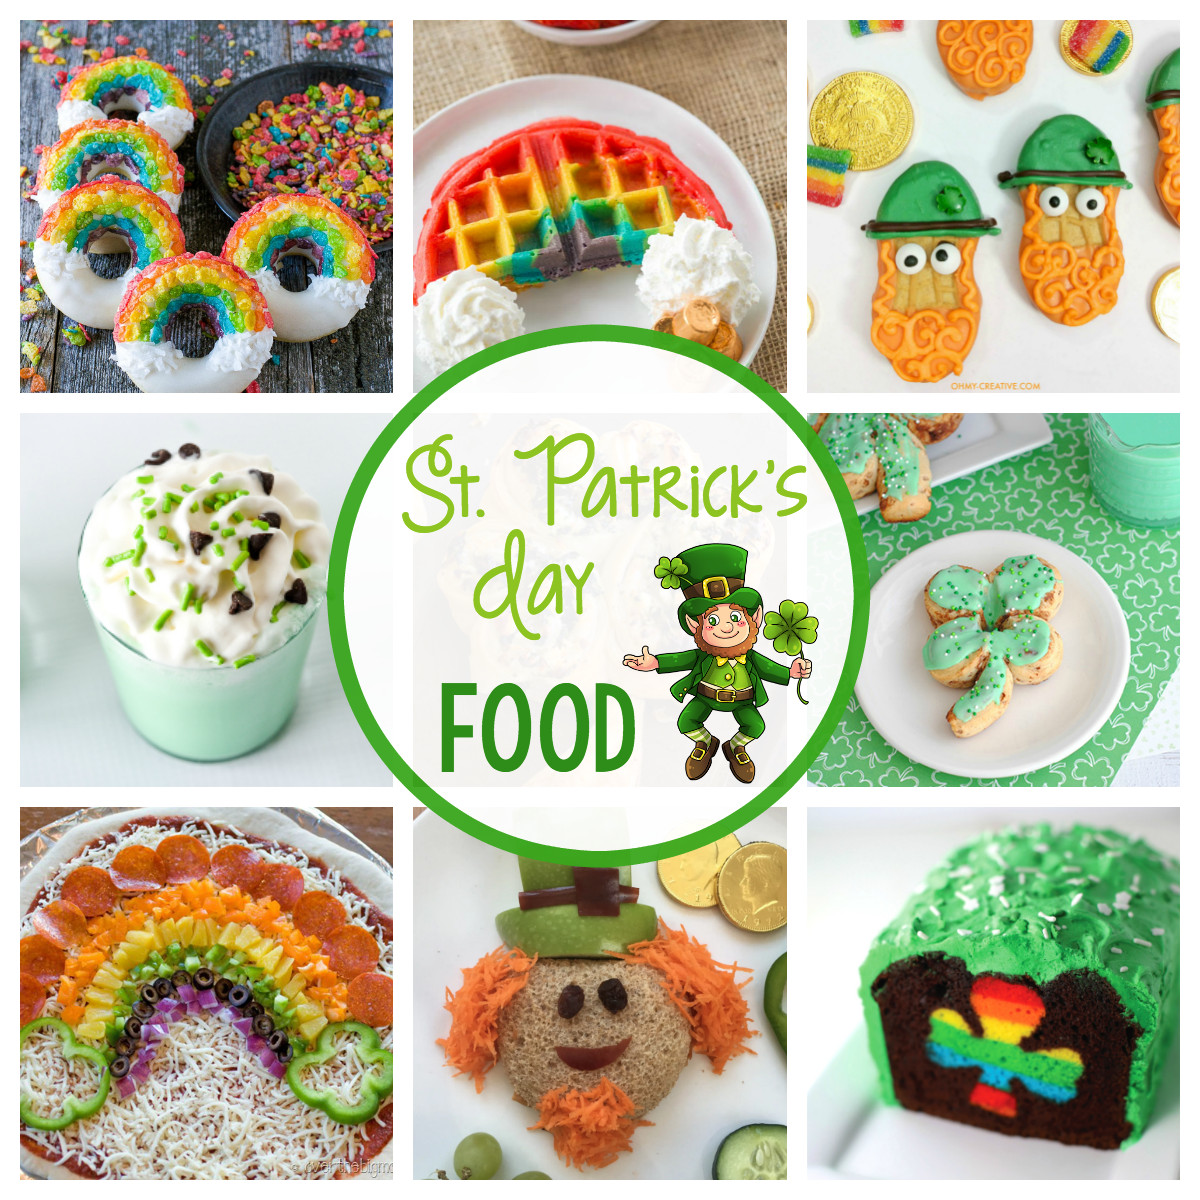 Food For St Patrick's Day Party
 17 St Patrick s Day Food Ideas for Kids – Fun Squared